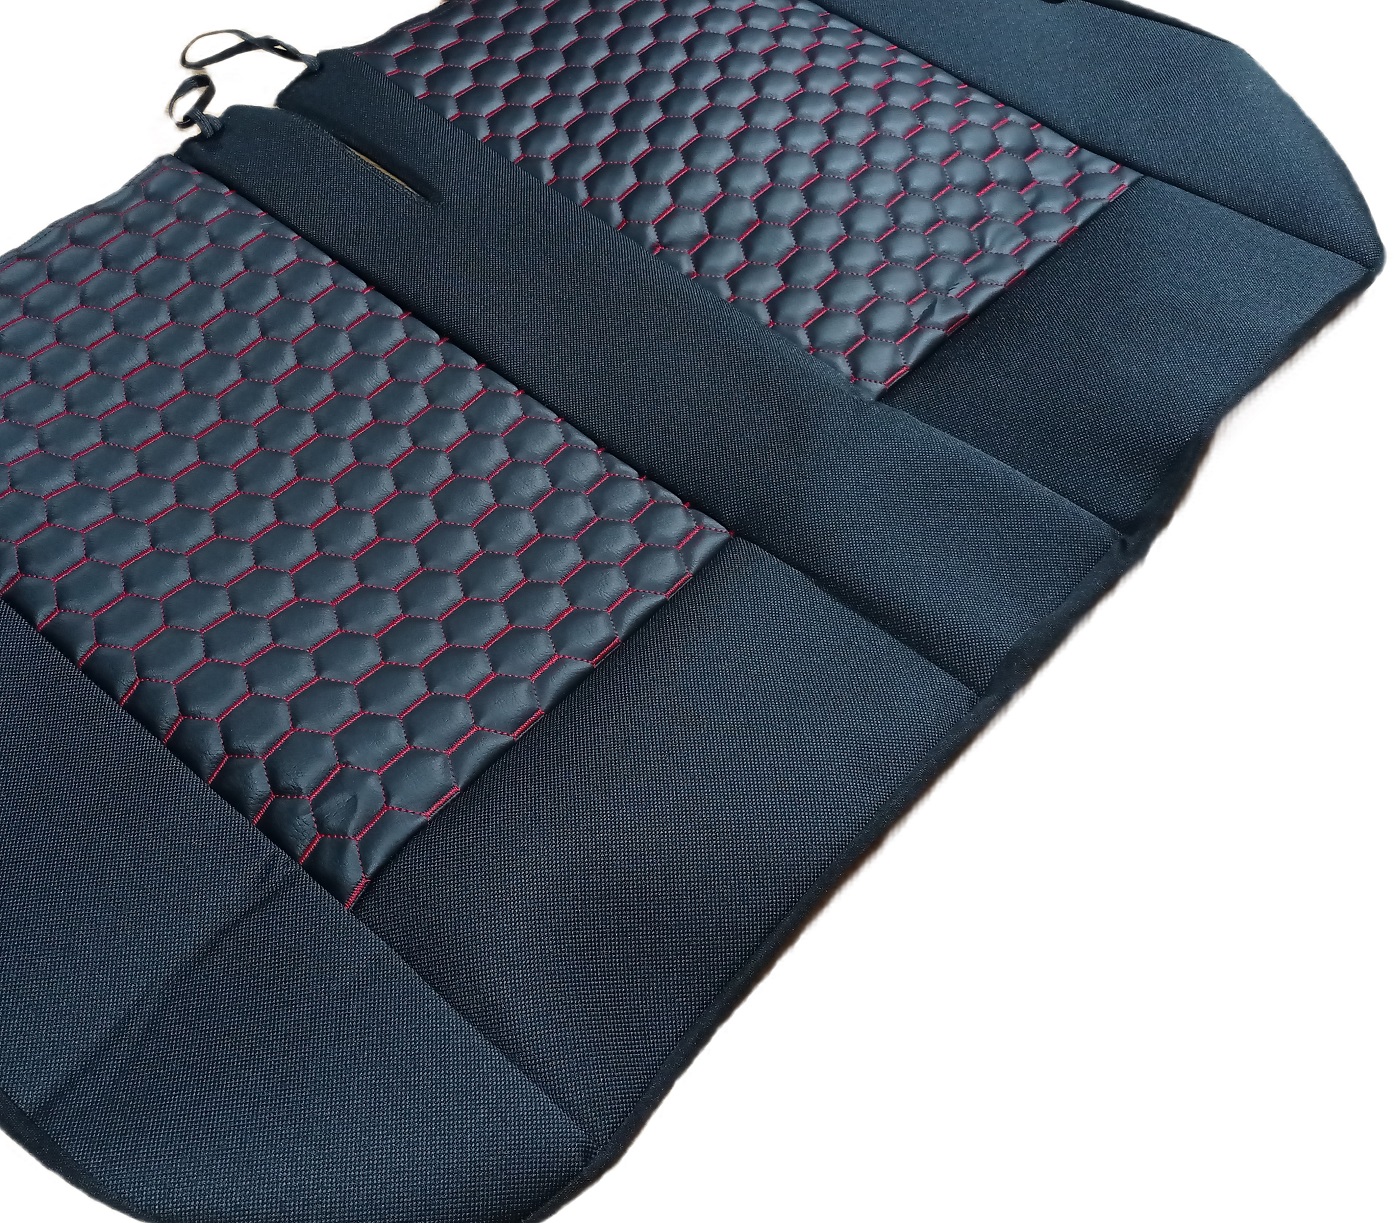 Seat covers for MERCEDES SPRINTER Van Black Red Seam Leather